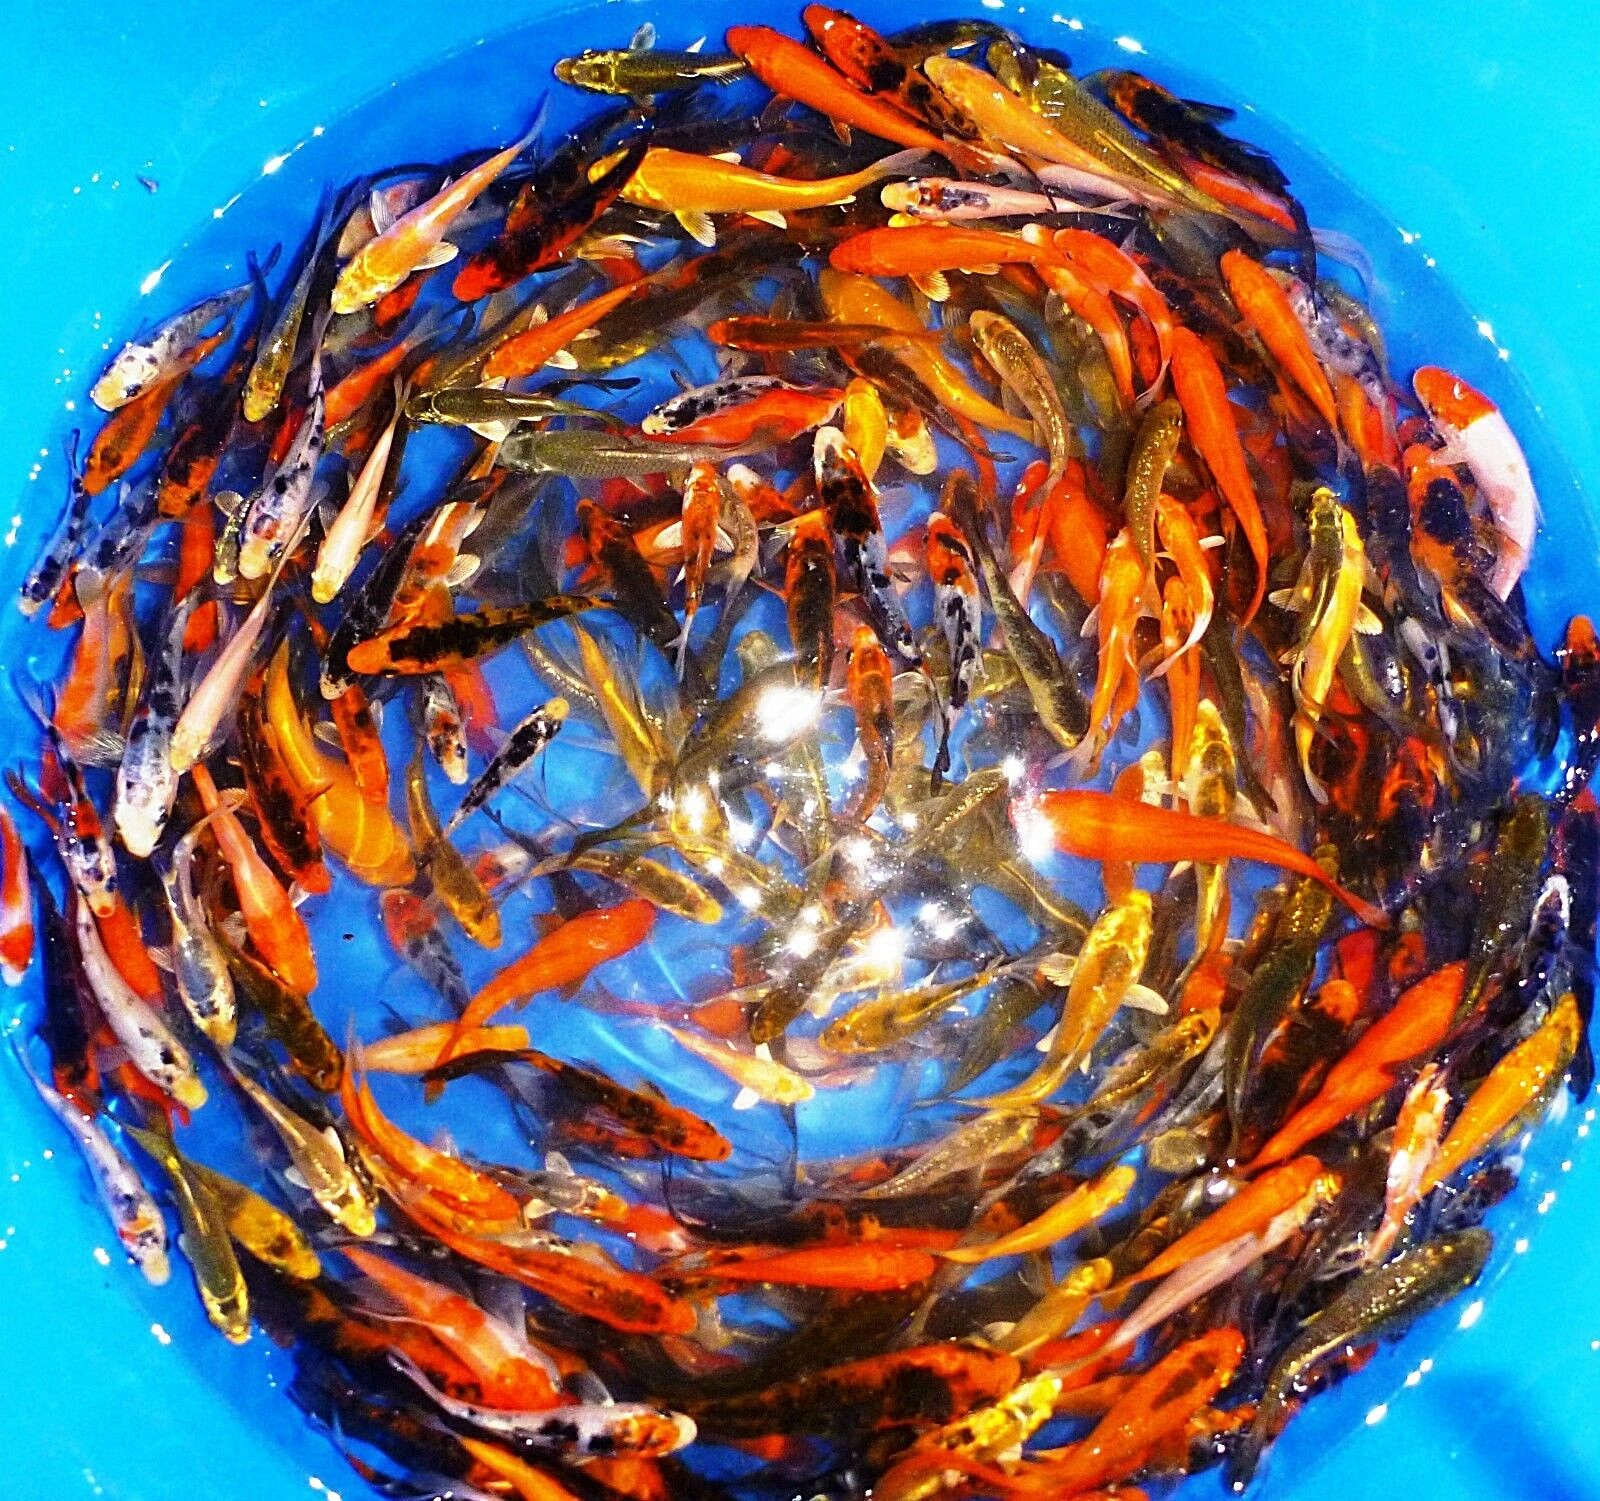 25-lot Assorted 2”-4” Live Koi Standard And Butterfly Fin Fish Mixed Lot Pkf